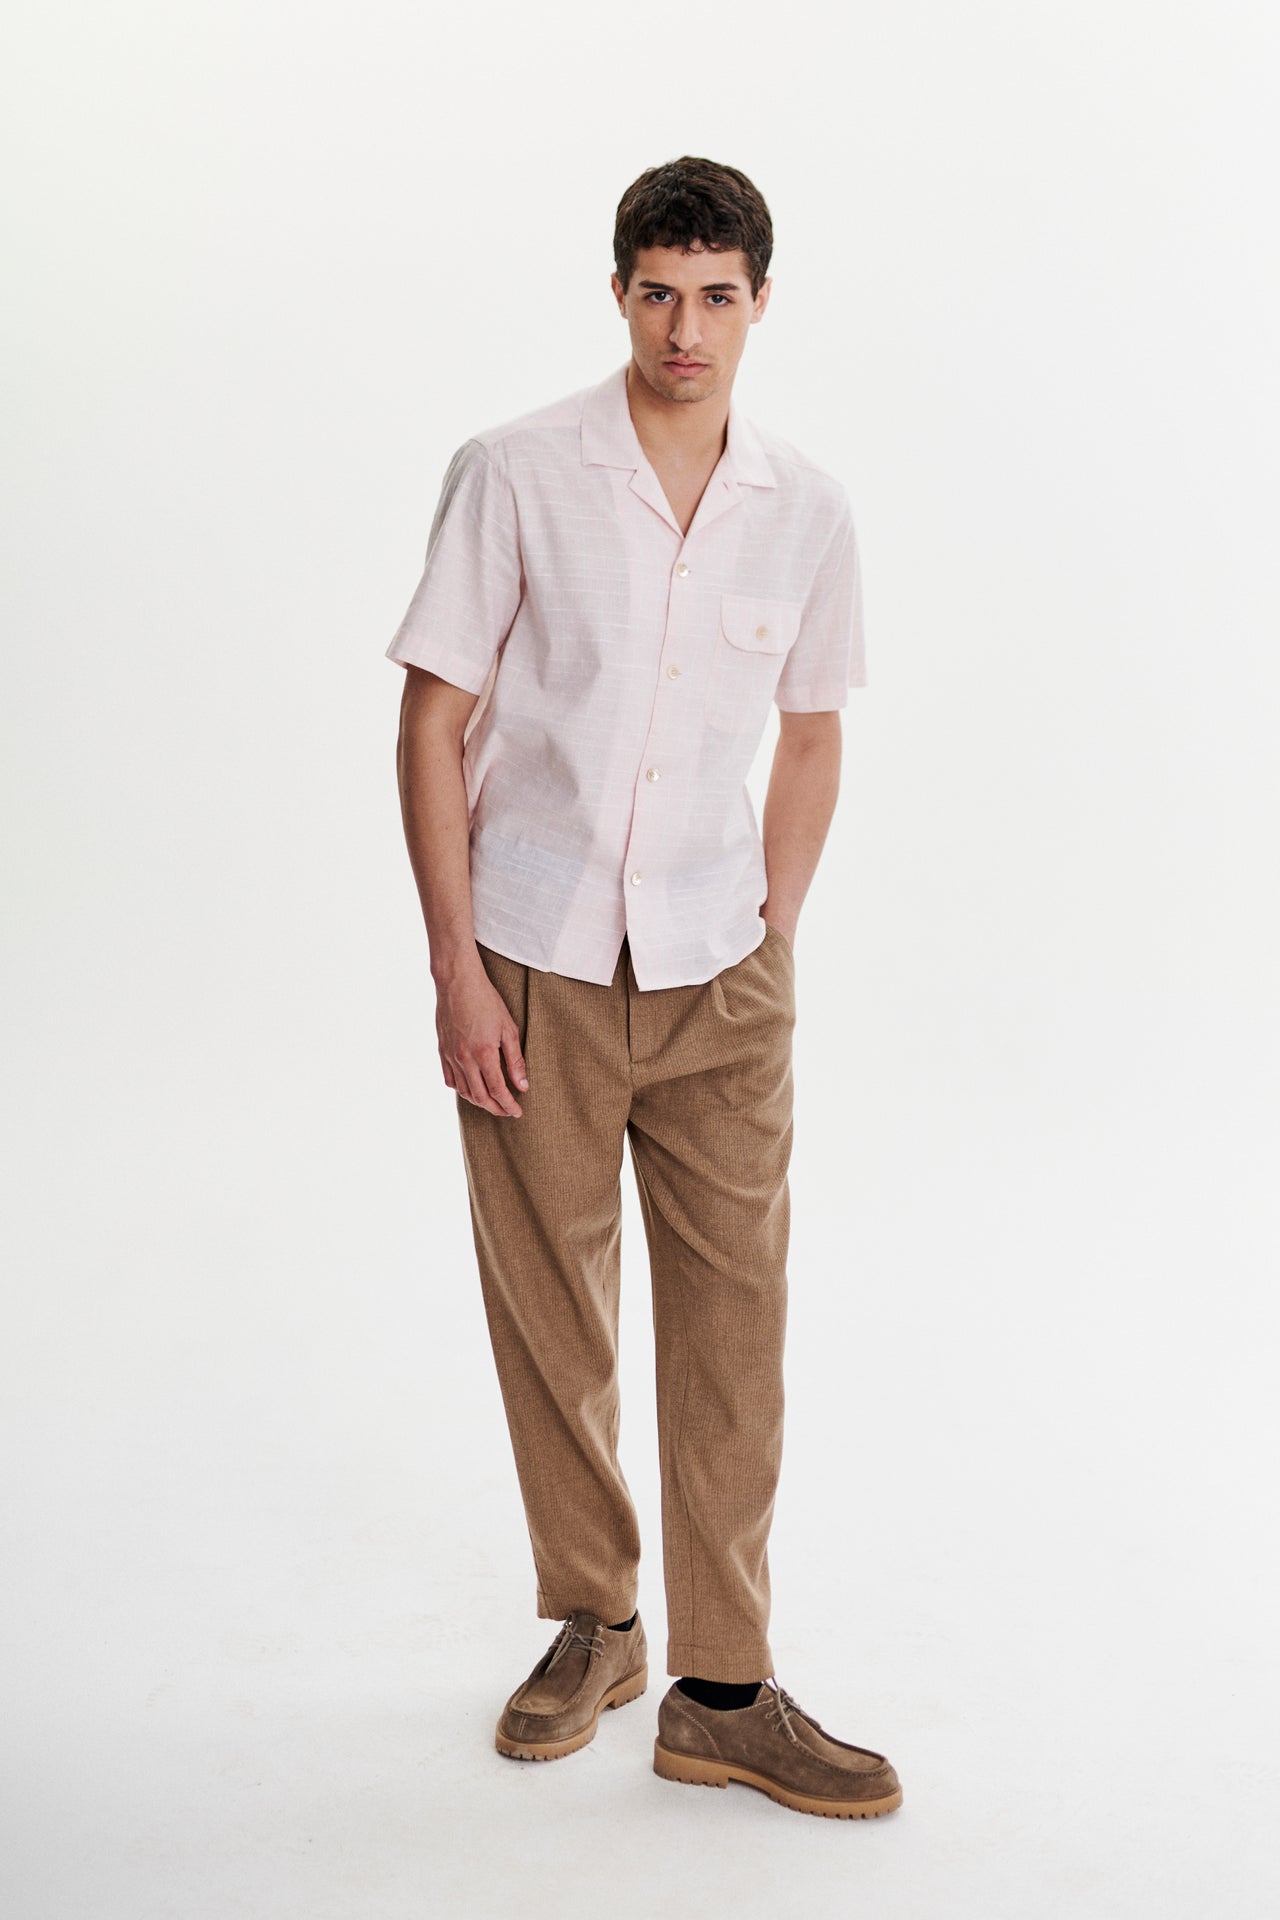 Short Sleeve Camp Collar Shirt in a Subtle Pink Mix of Portuguese Cotton, Linen and Pineapple